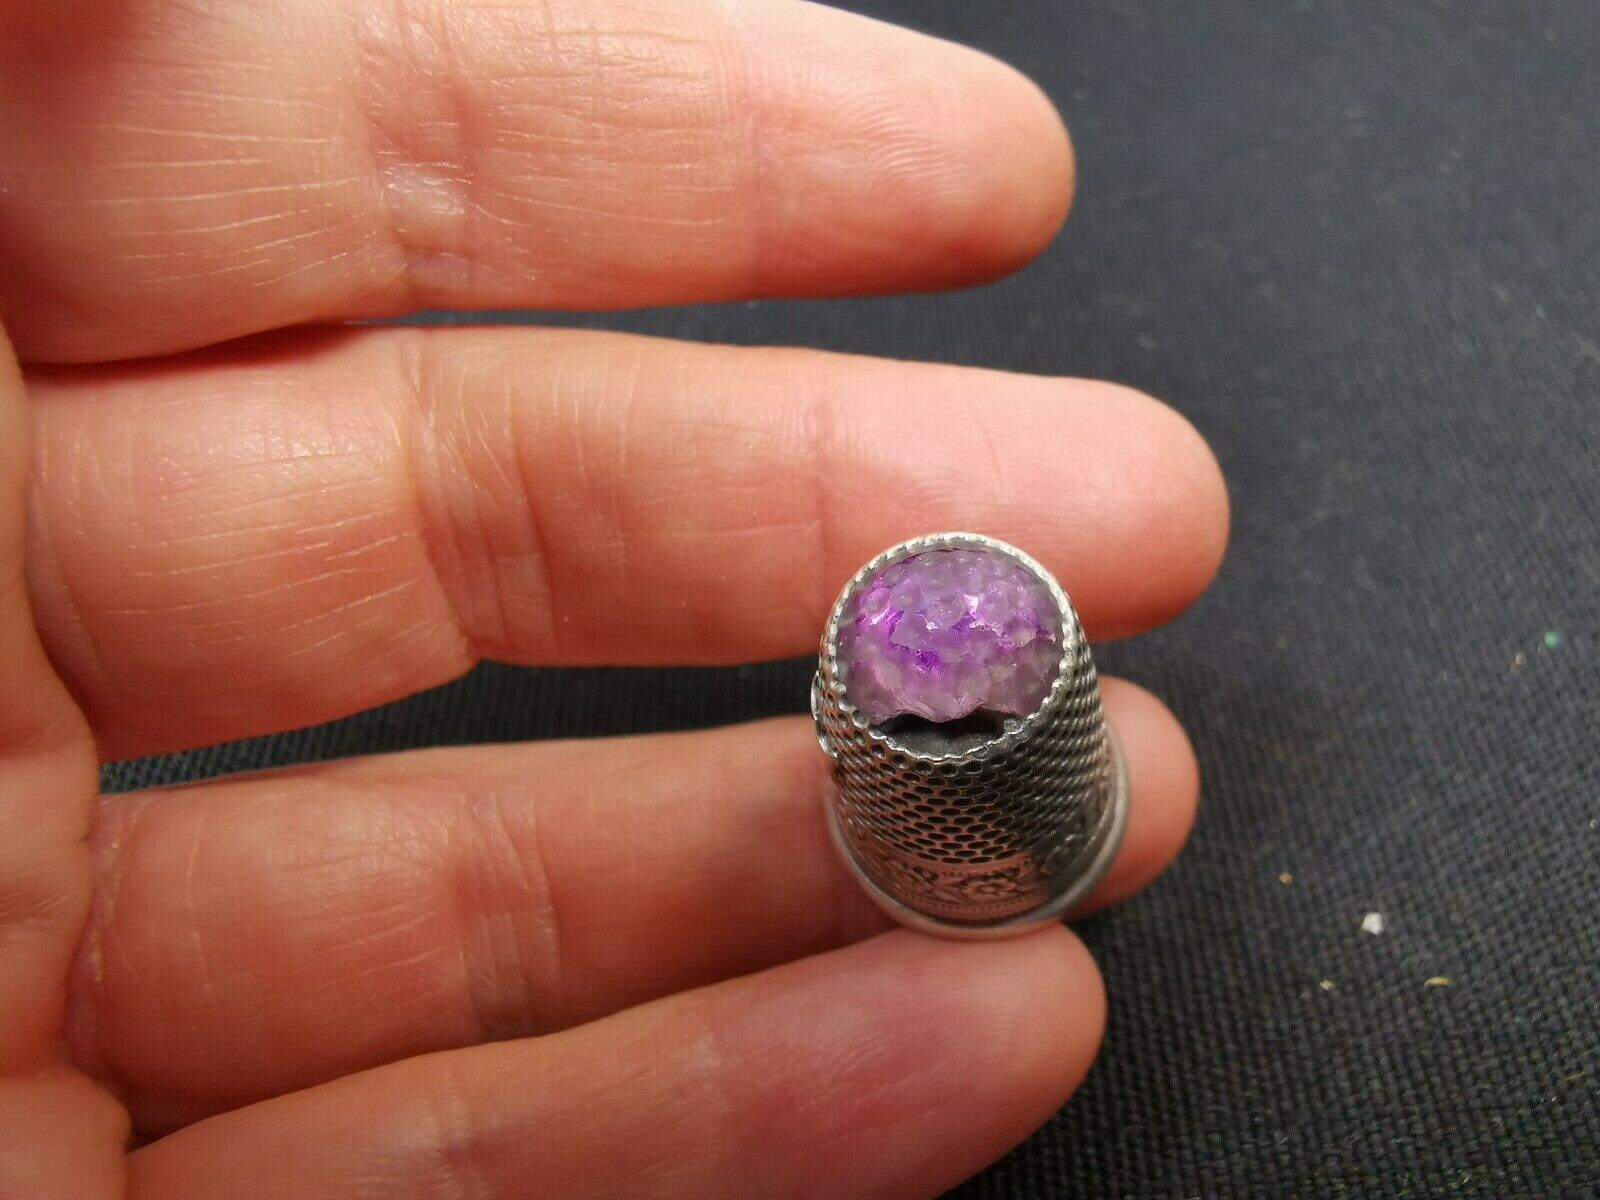 Victorian Design .925 Sterling Purple LAB Amethyst Silver Ring Size 9 KN-4580